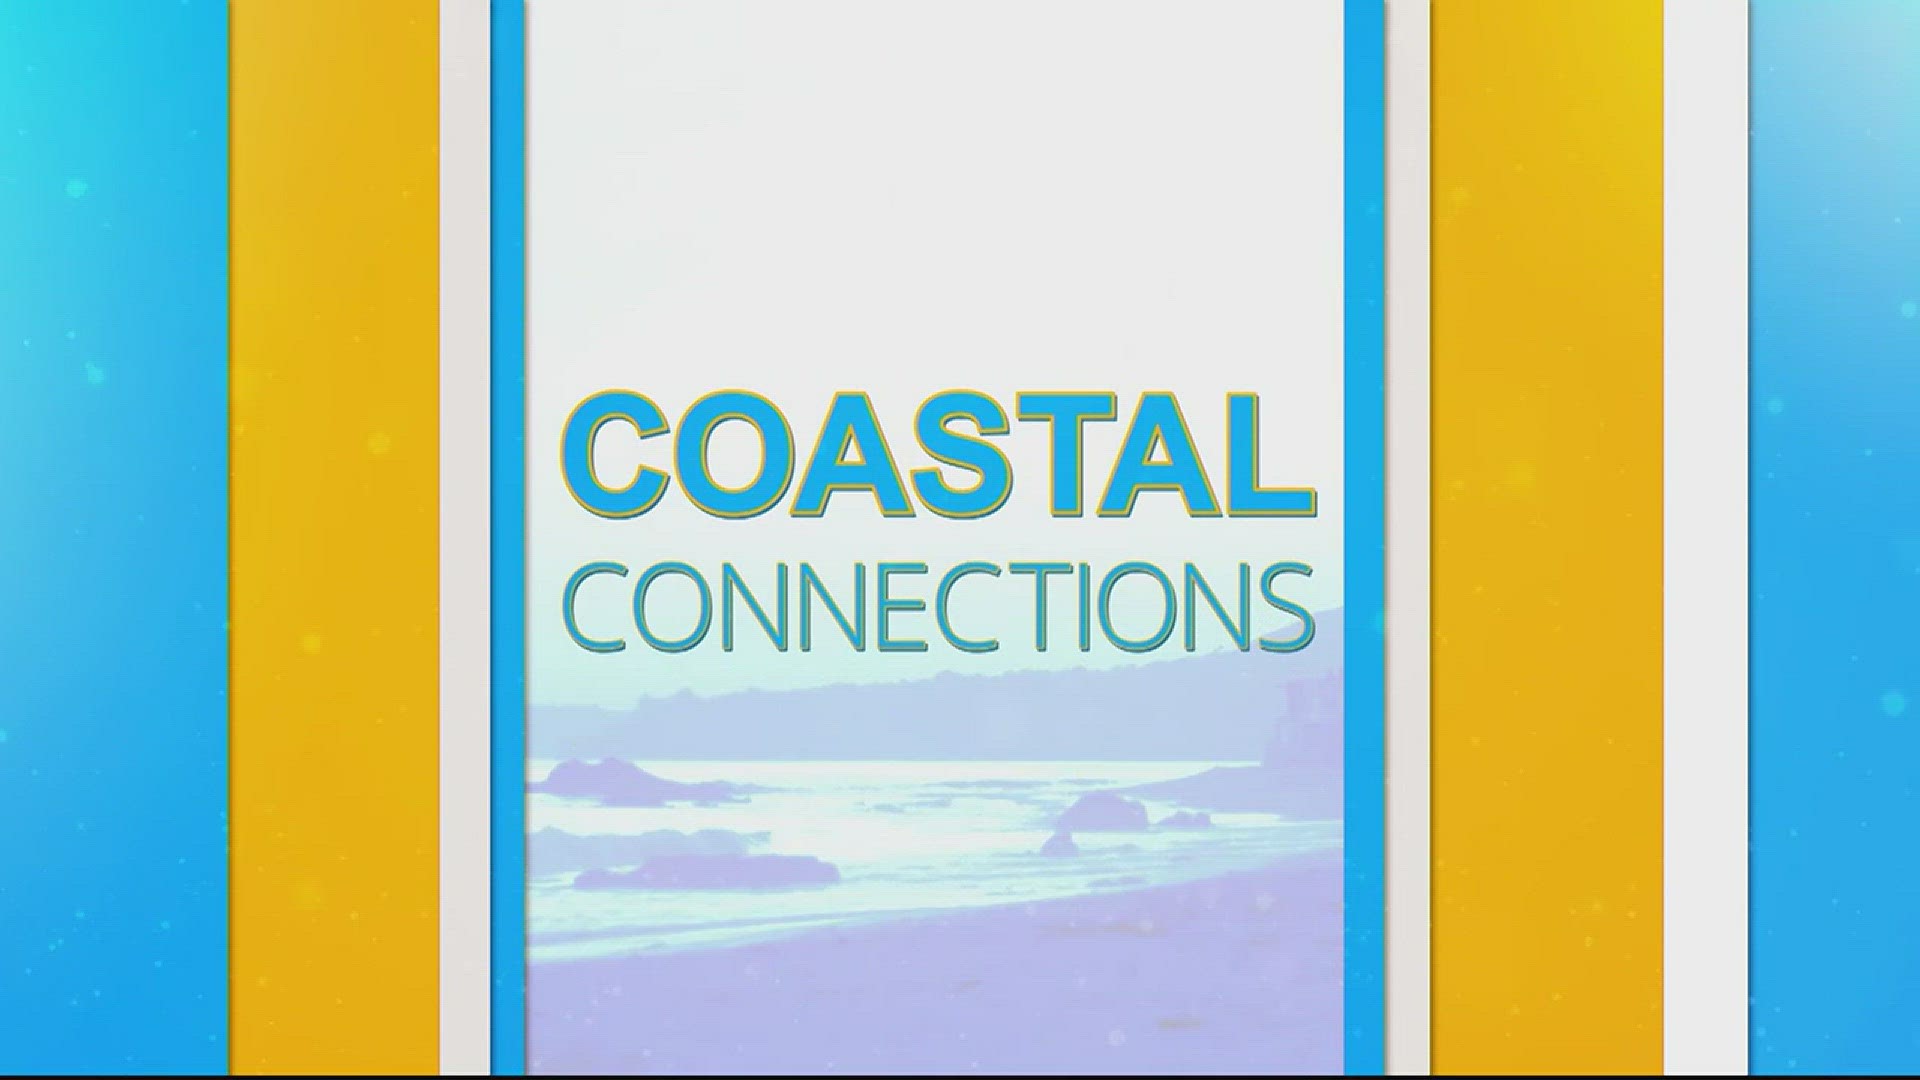 April 2018 edition of Coastal Connections from 13News Now